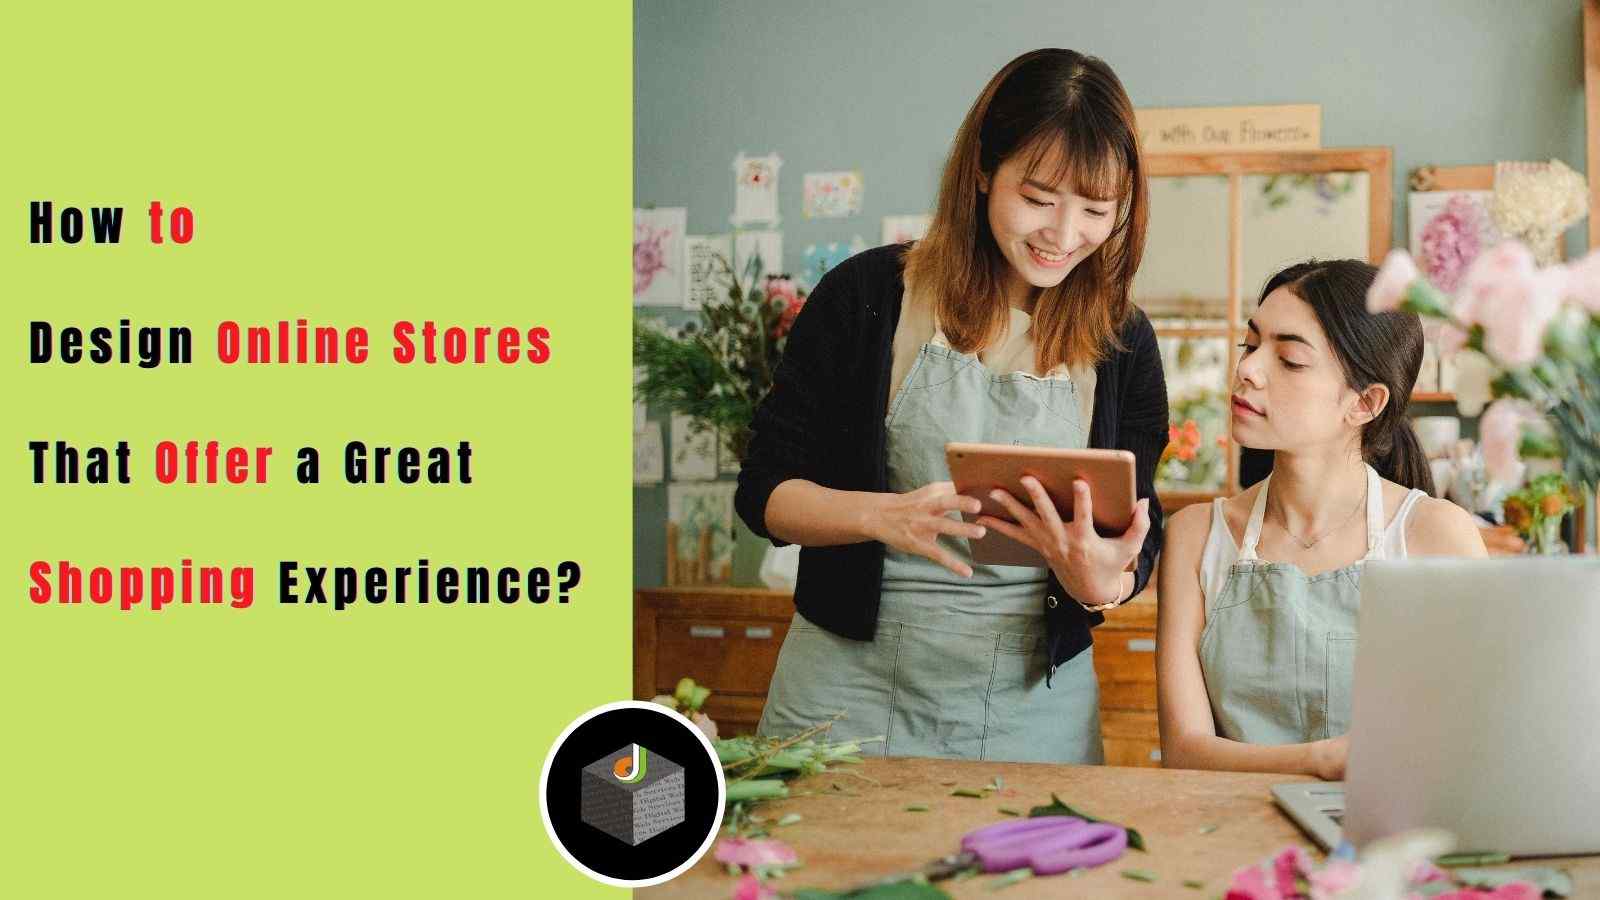 How to Design Online Stores That Offer a Great Shopping Experience